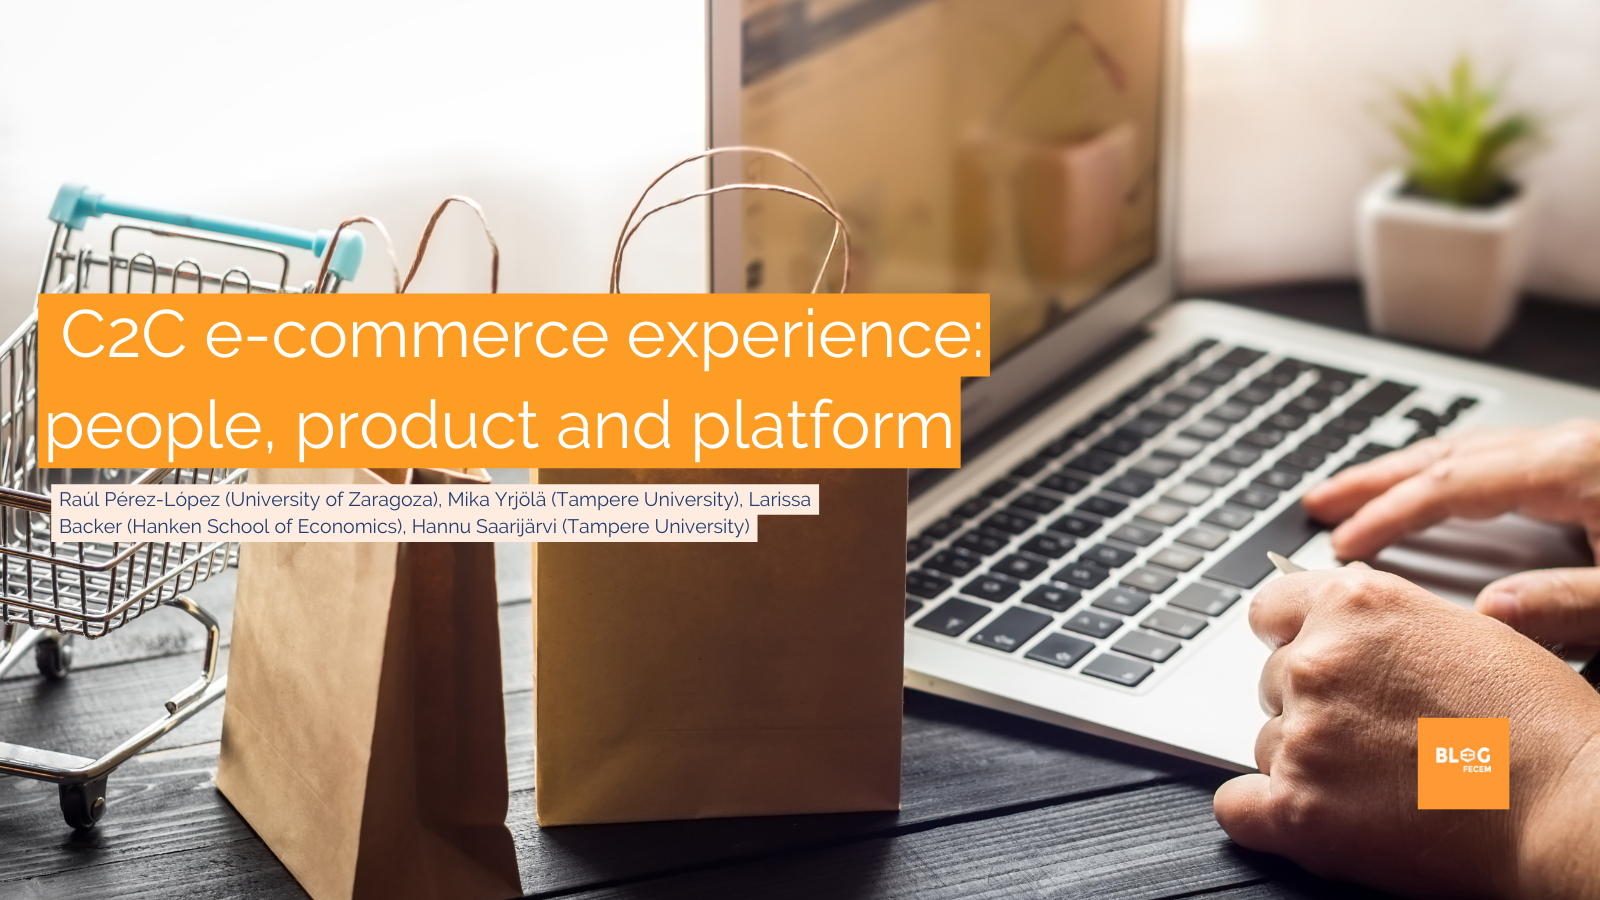 C2C e-commerce experience: people, product and platform